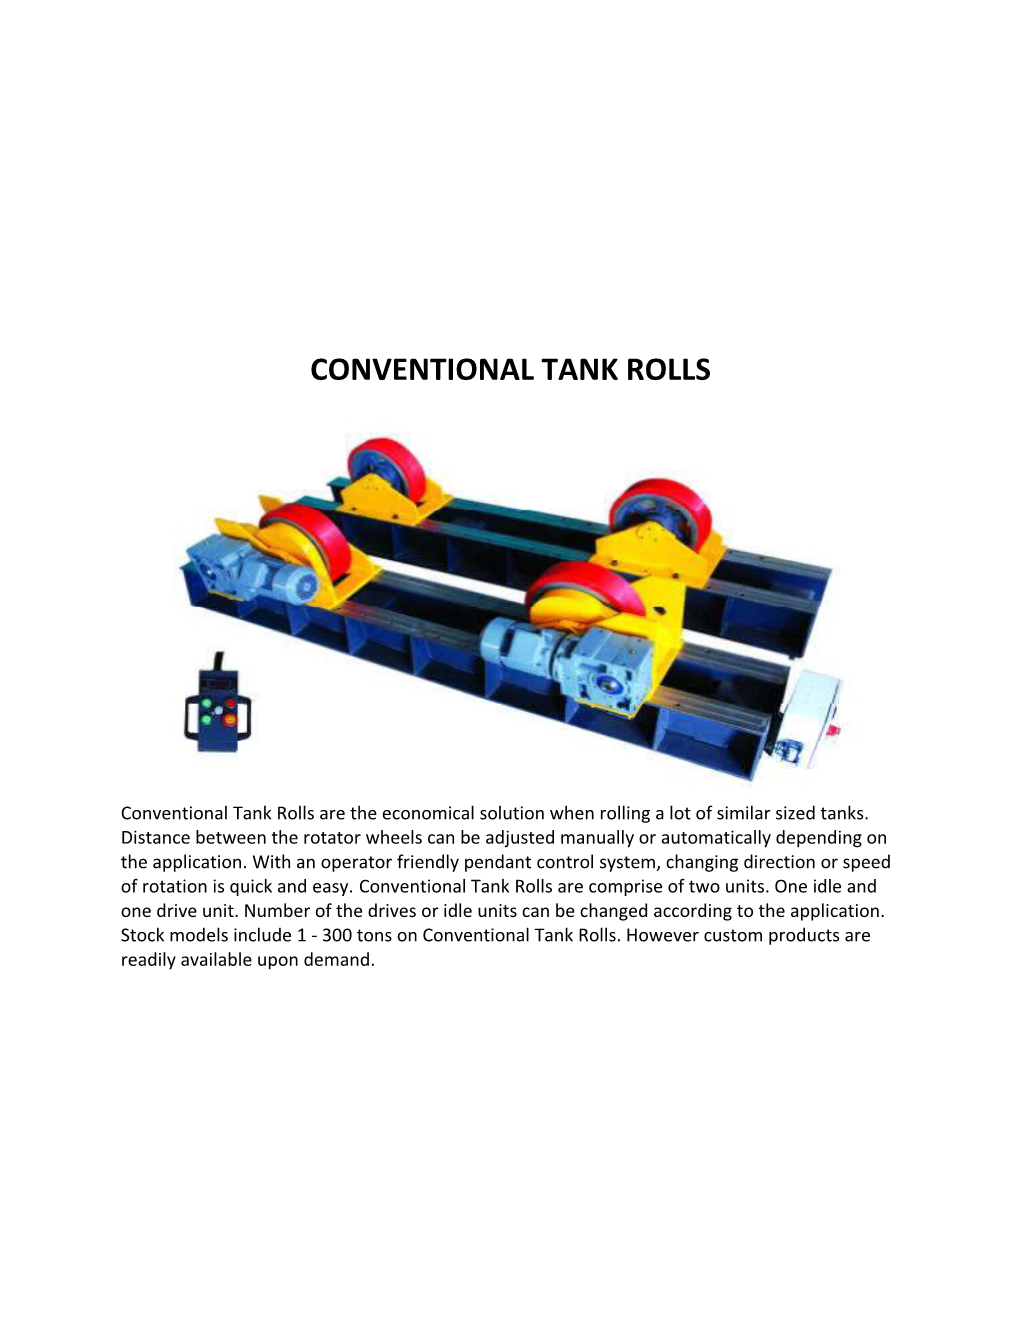 Conventional Tank Rolls Are the Economical Solution When Rolling a Lot of Similar Sized Tanks